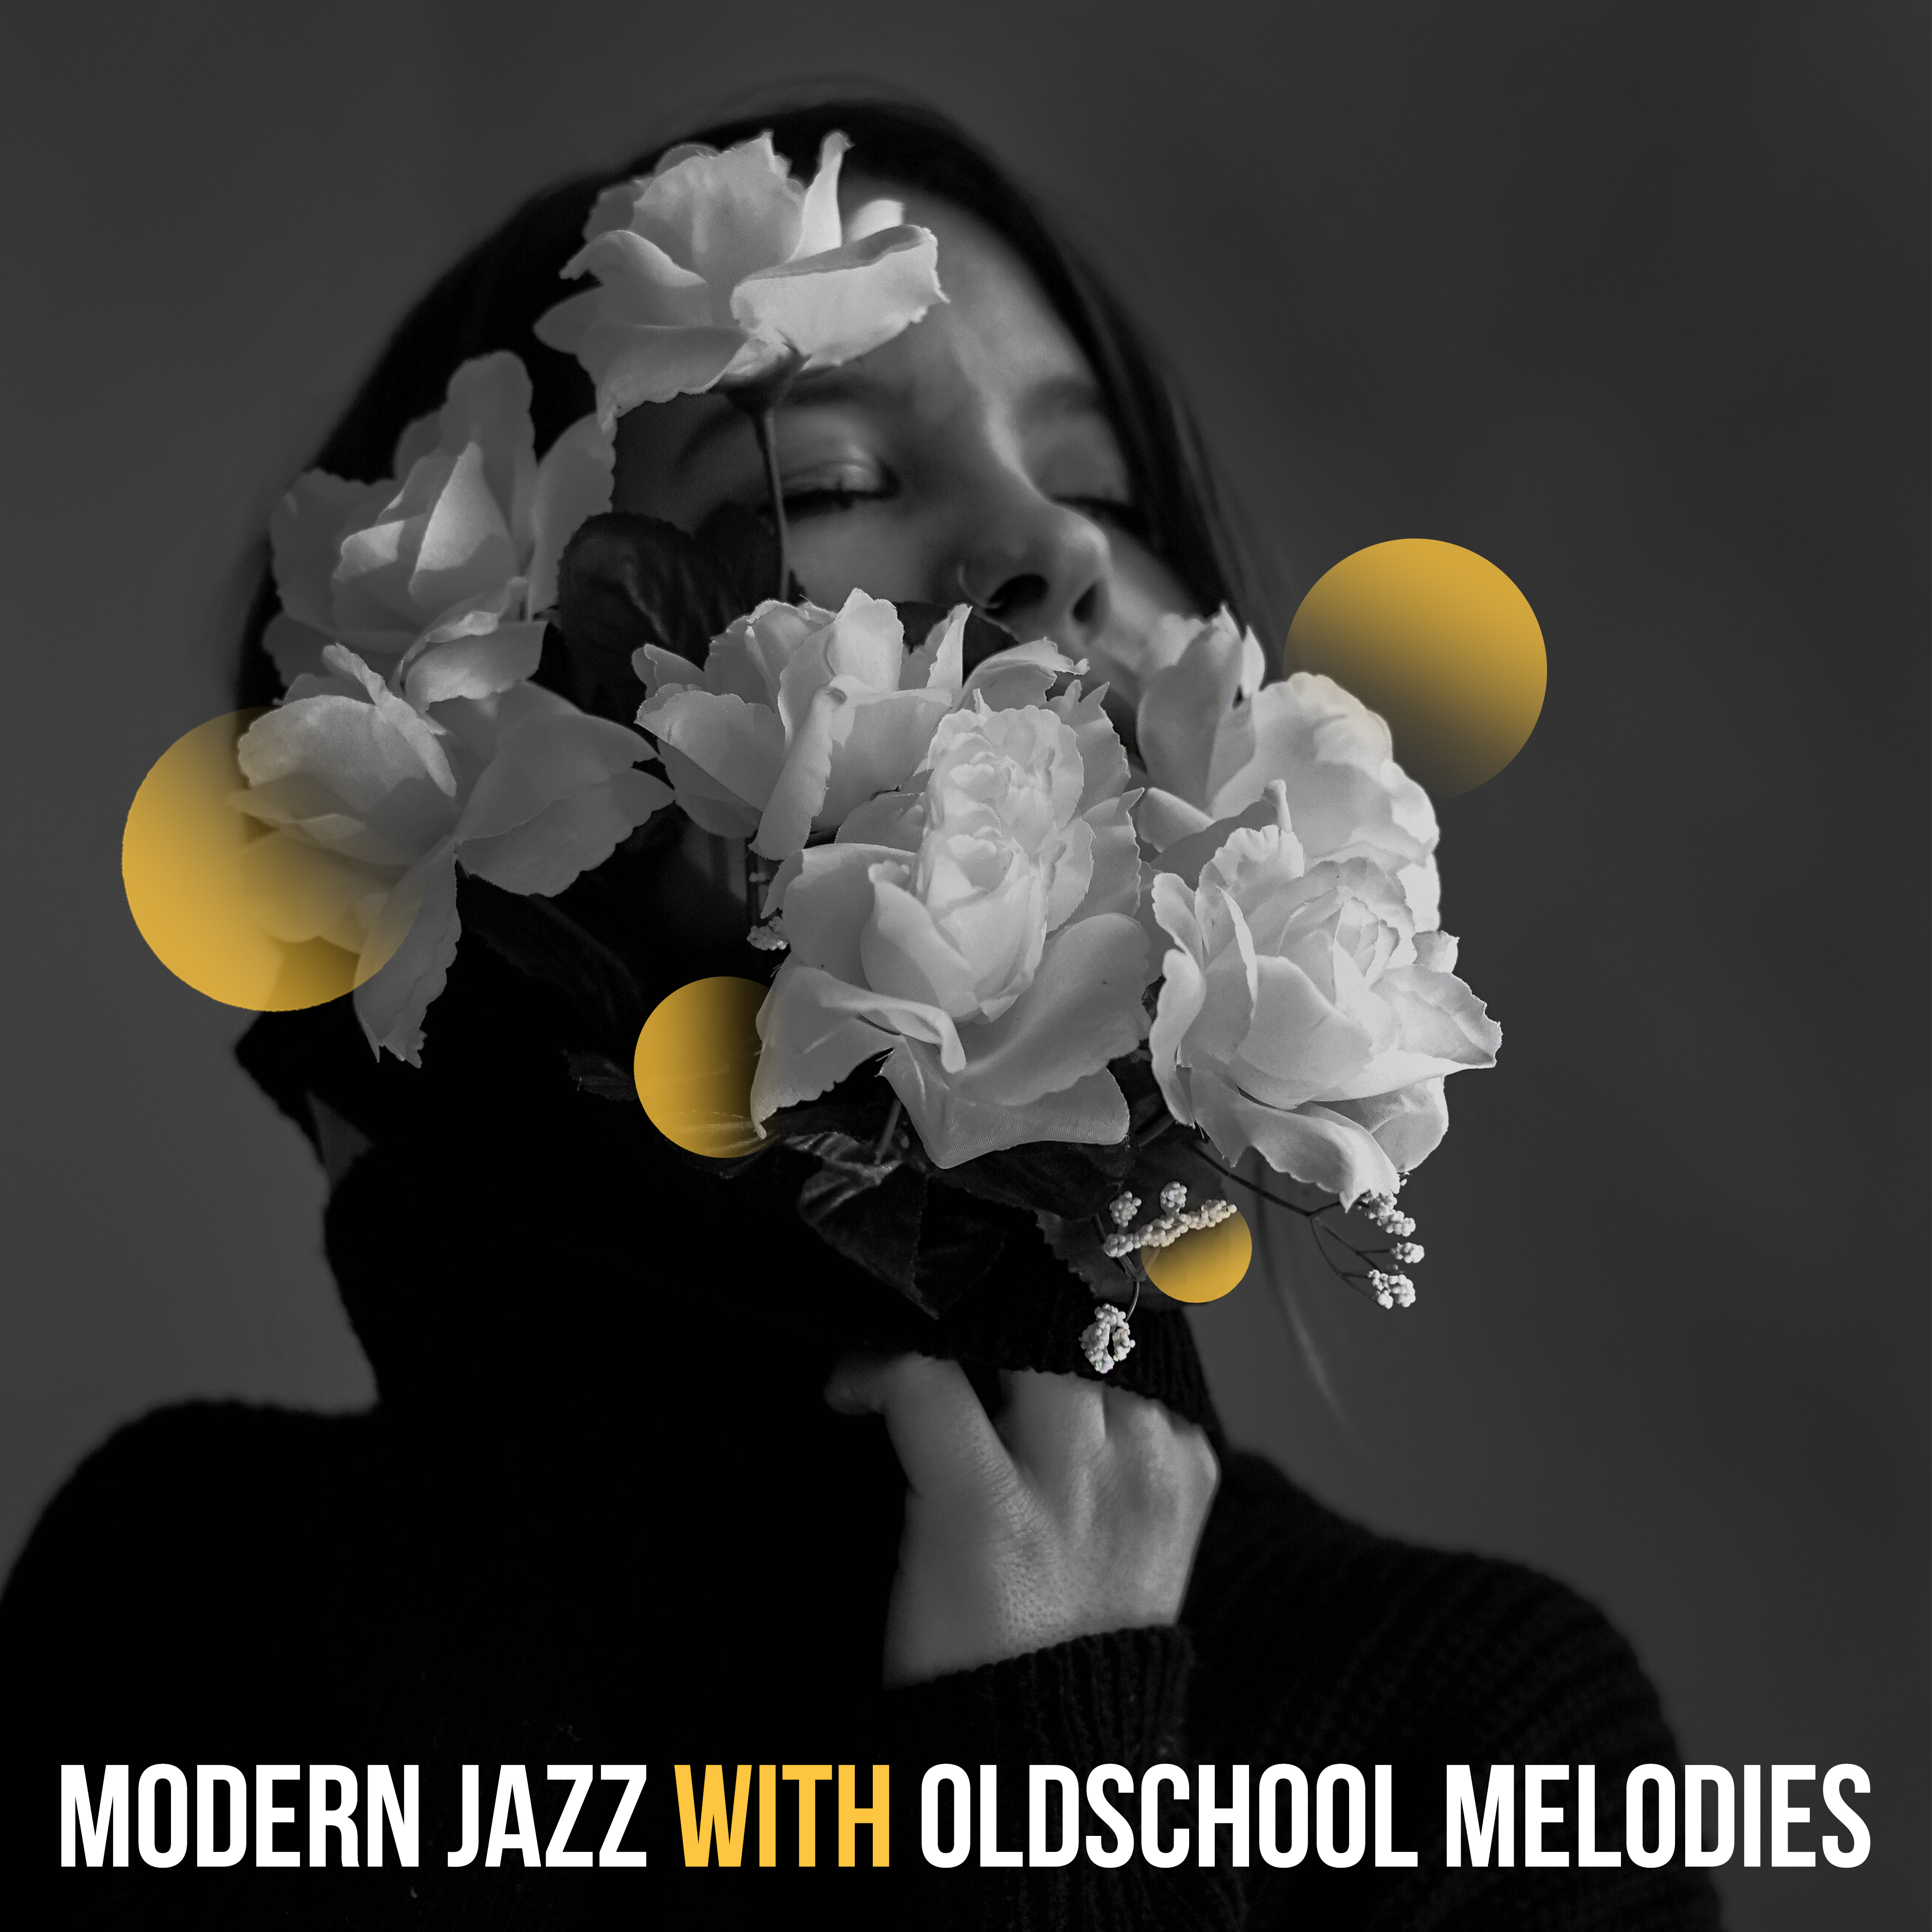 Modern Jazz with Oldschool Melodies